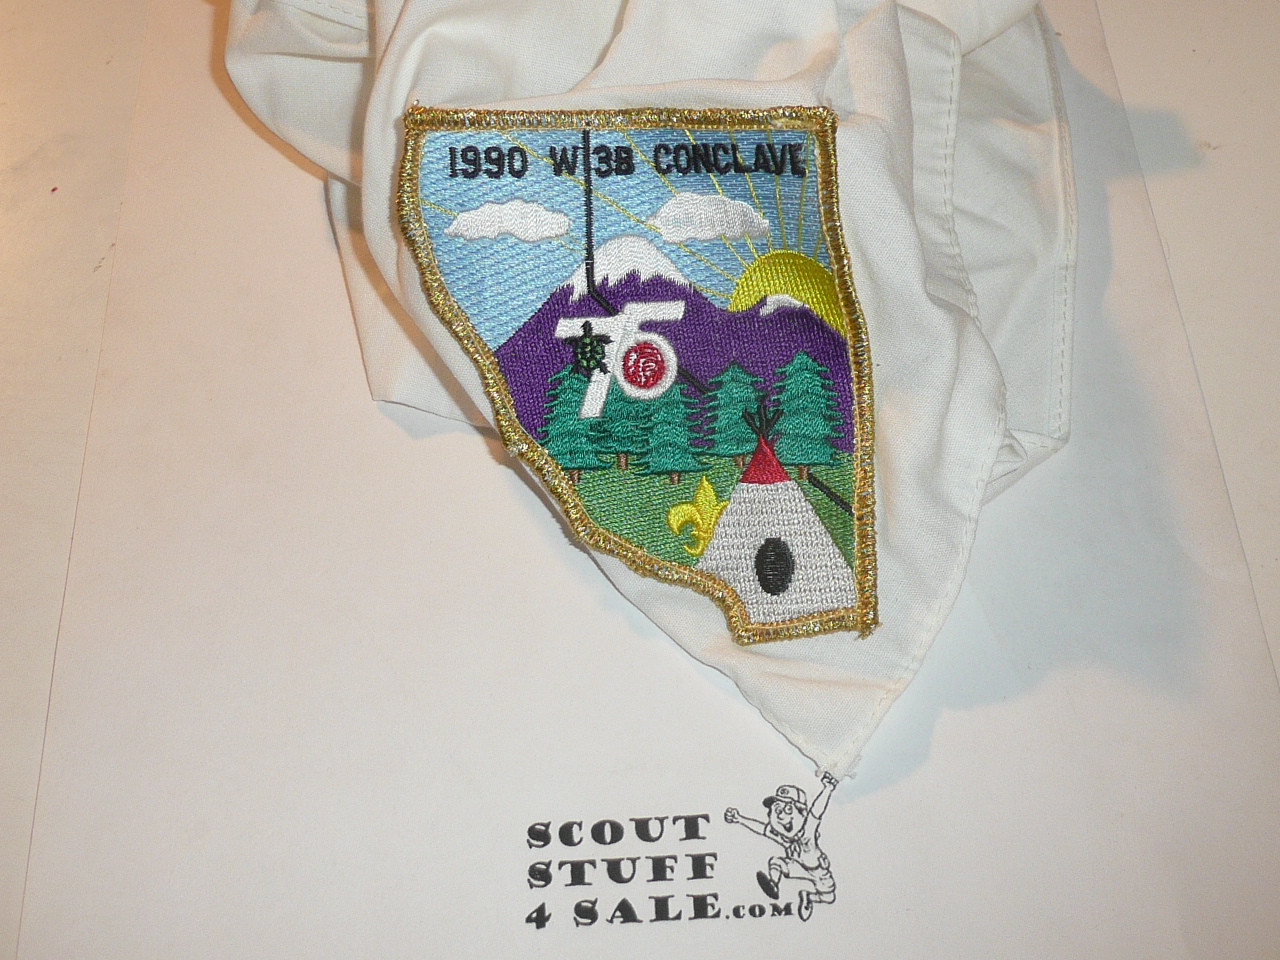 Section W3B 1990 O.A. Conclave Officer's Neckerchief with gold mylar bdr patch on it - Scout